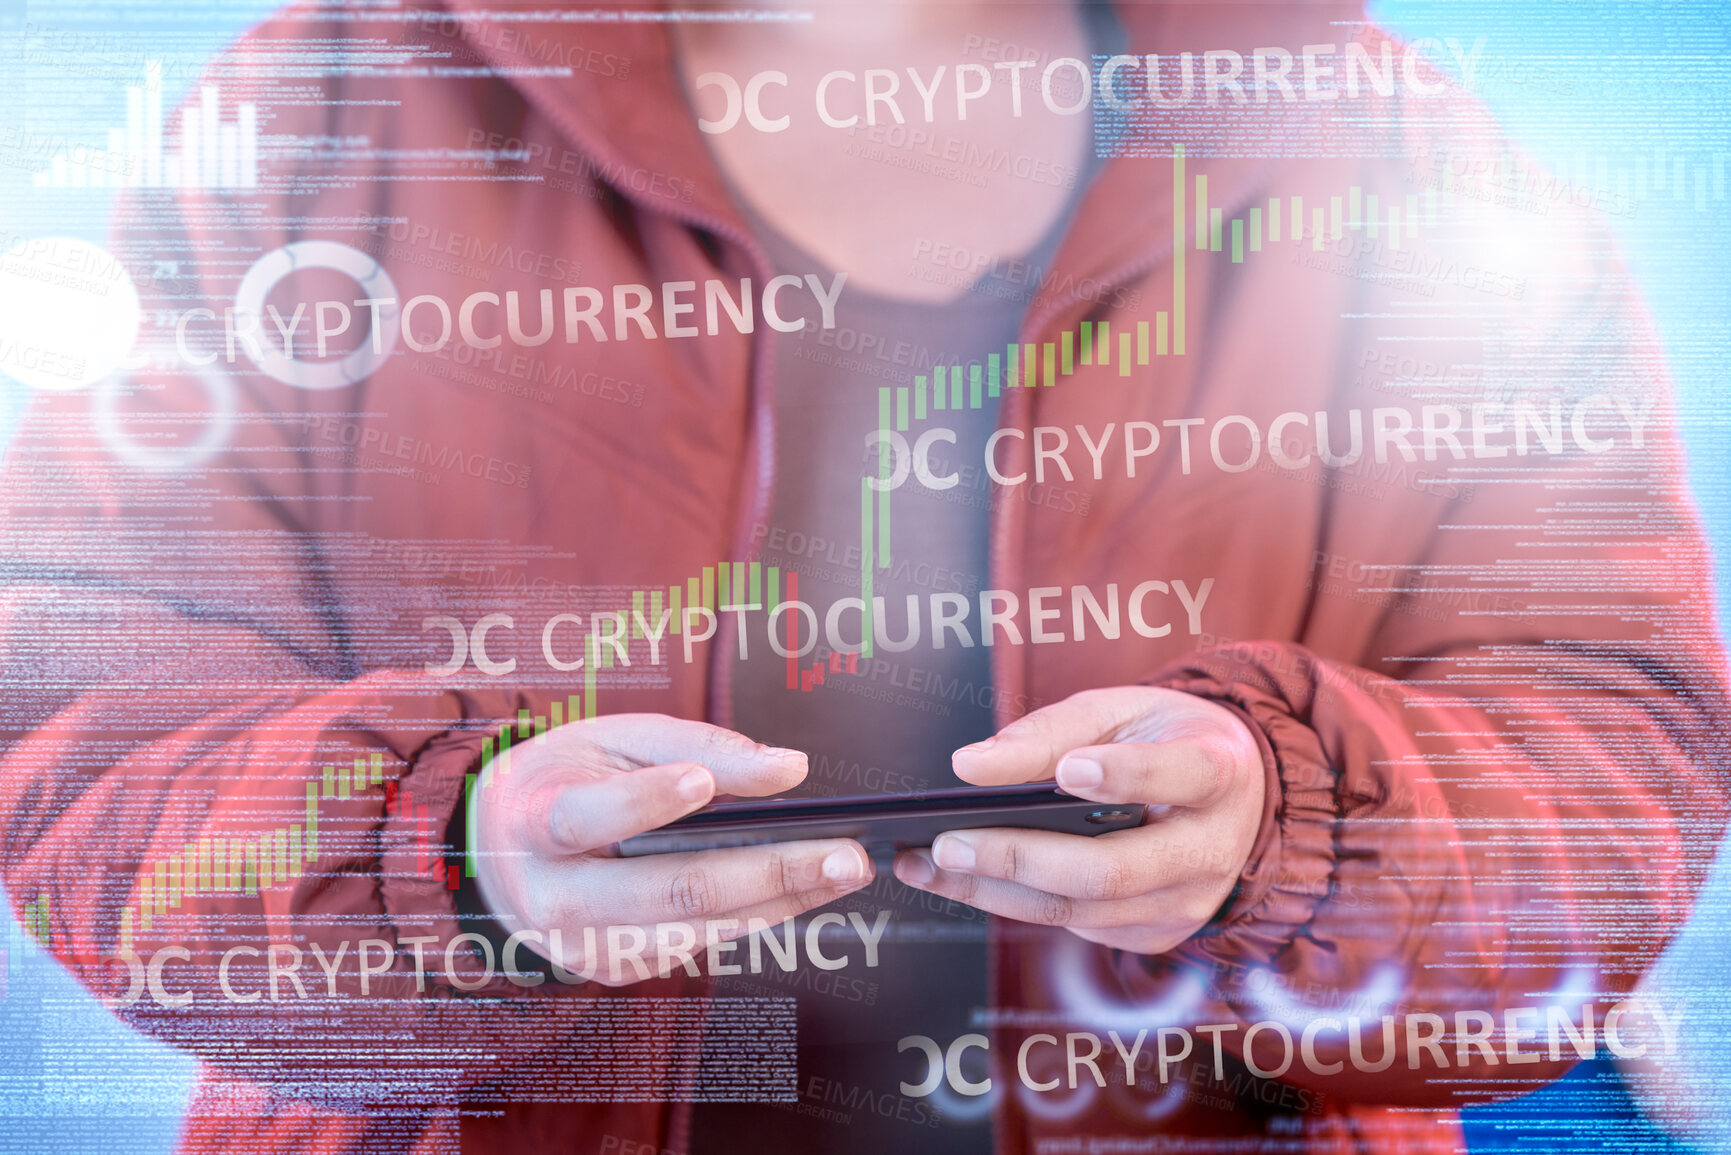 Buy stock photo Cryptocurrency hologram, phone or hands of woman trading on stock market to check financial investments. Closeup, charts data or trader reading price growth news in global or digital economy online 